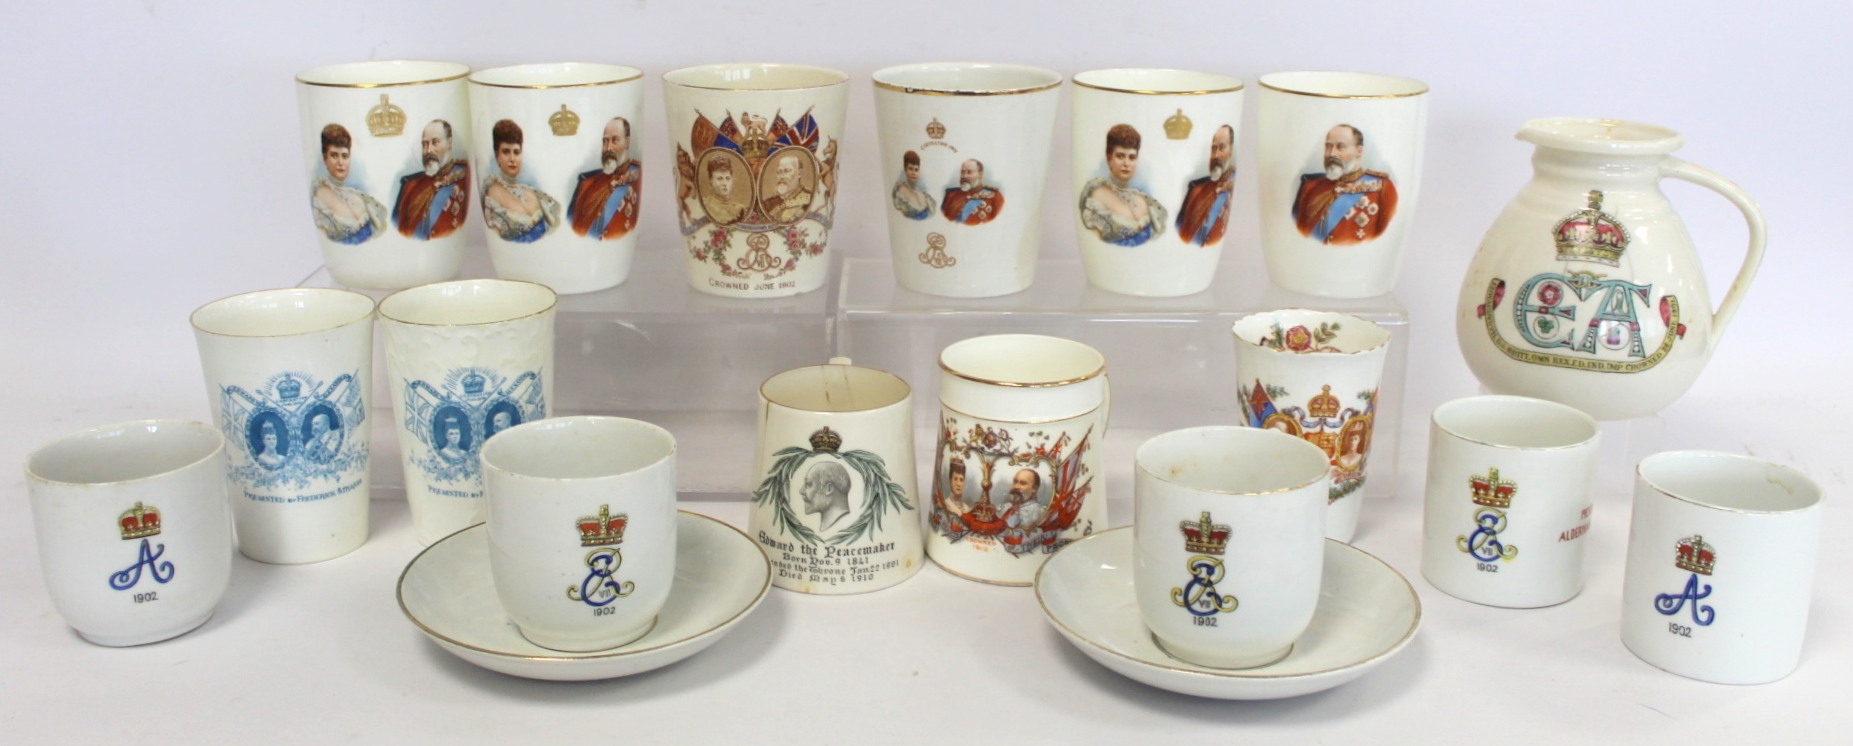 Nine commemorative beakers for the Coronation of Edward VII and Queen Alexandra 1902, including